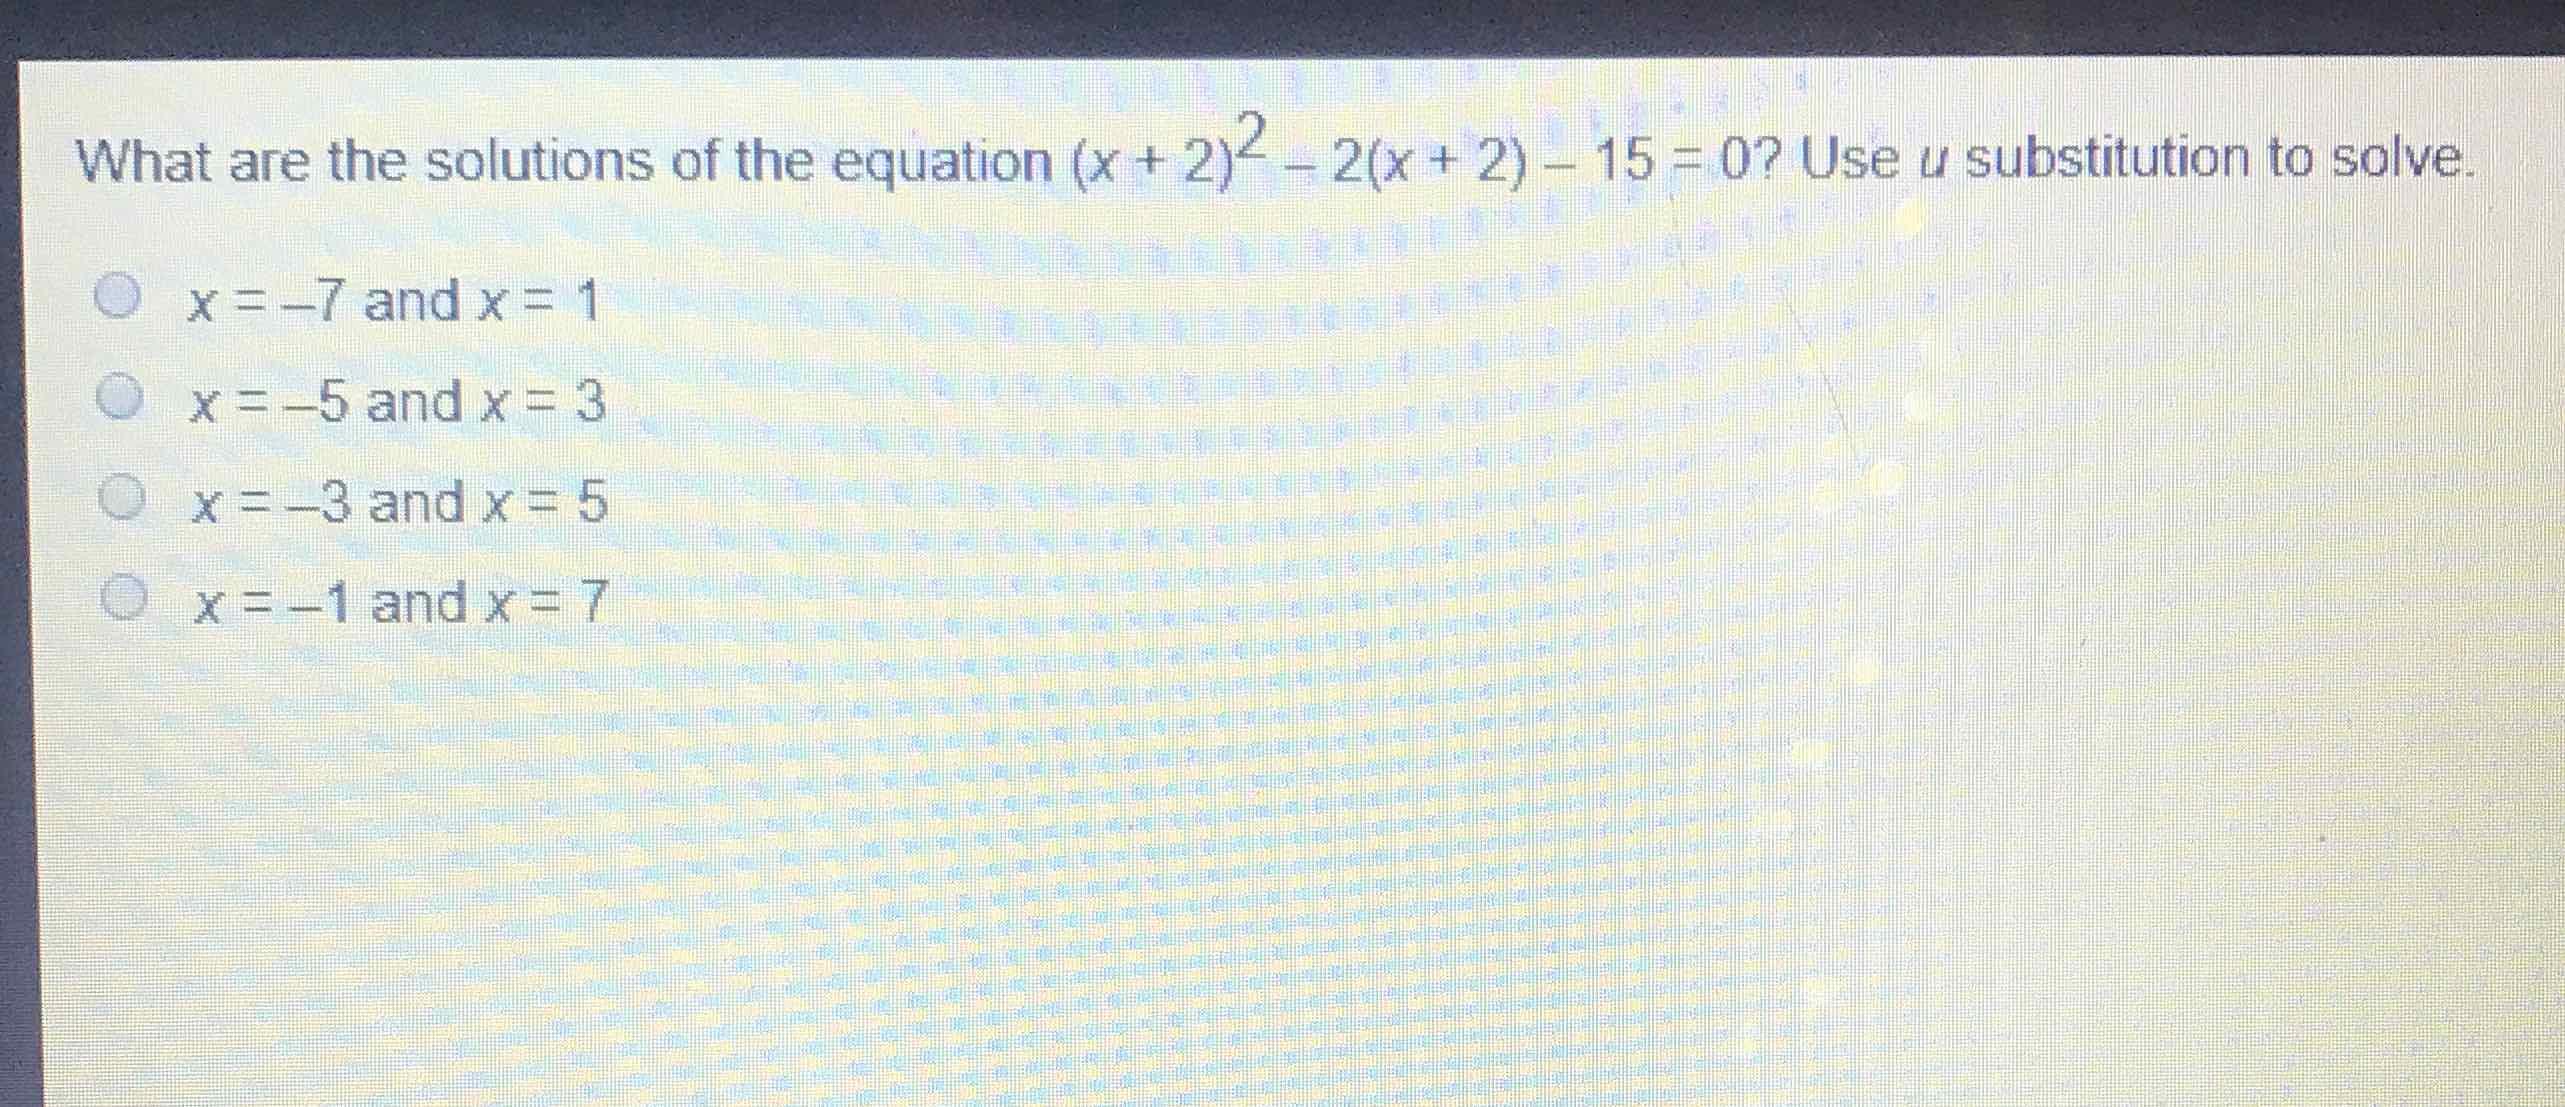 What are the solutions of the equation \( (x+2)^{2}-2(x+2)-15=0 ? \) Use \( u \) substitution to solve.
\( x=-7 \) and \( x=1 \)
\( x=-5 \) and \( x=3 \)
\( x=-3 \) and \( x=5 \)
\( x=-1 \) and \( x=7 \)